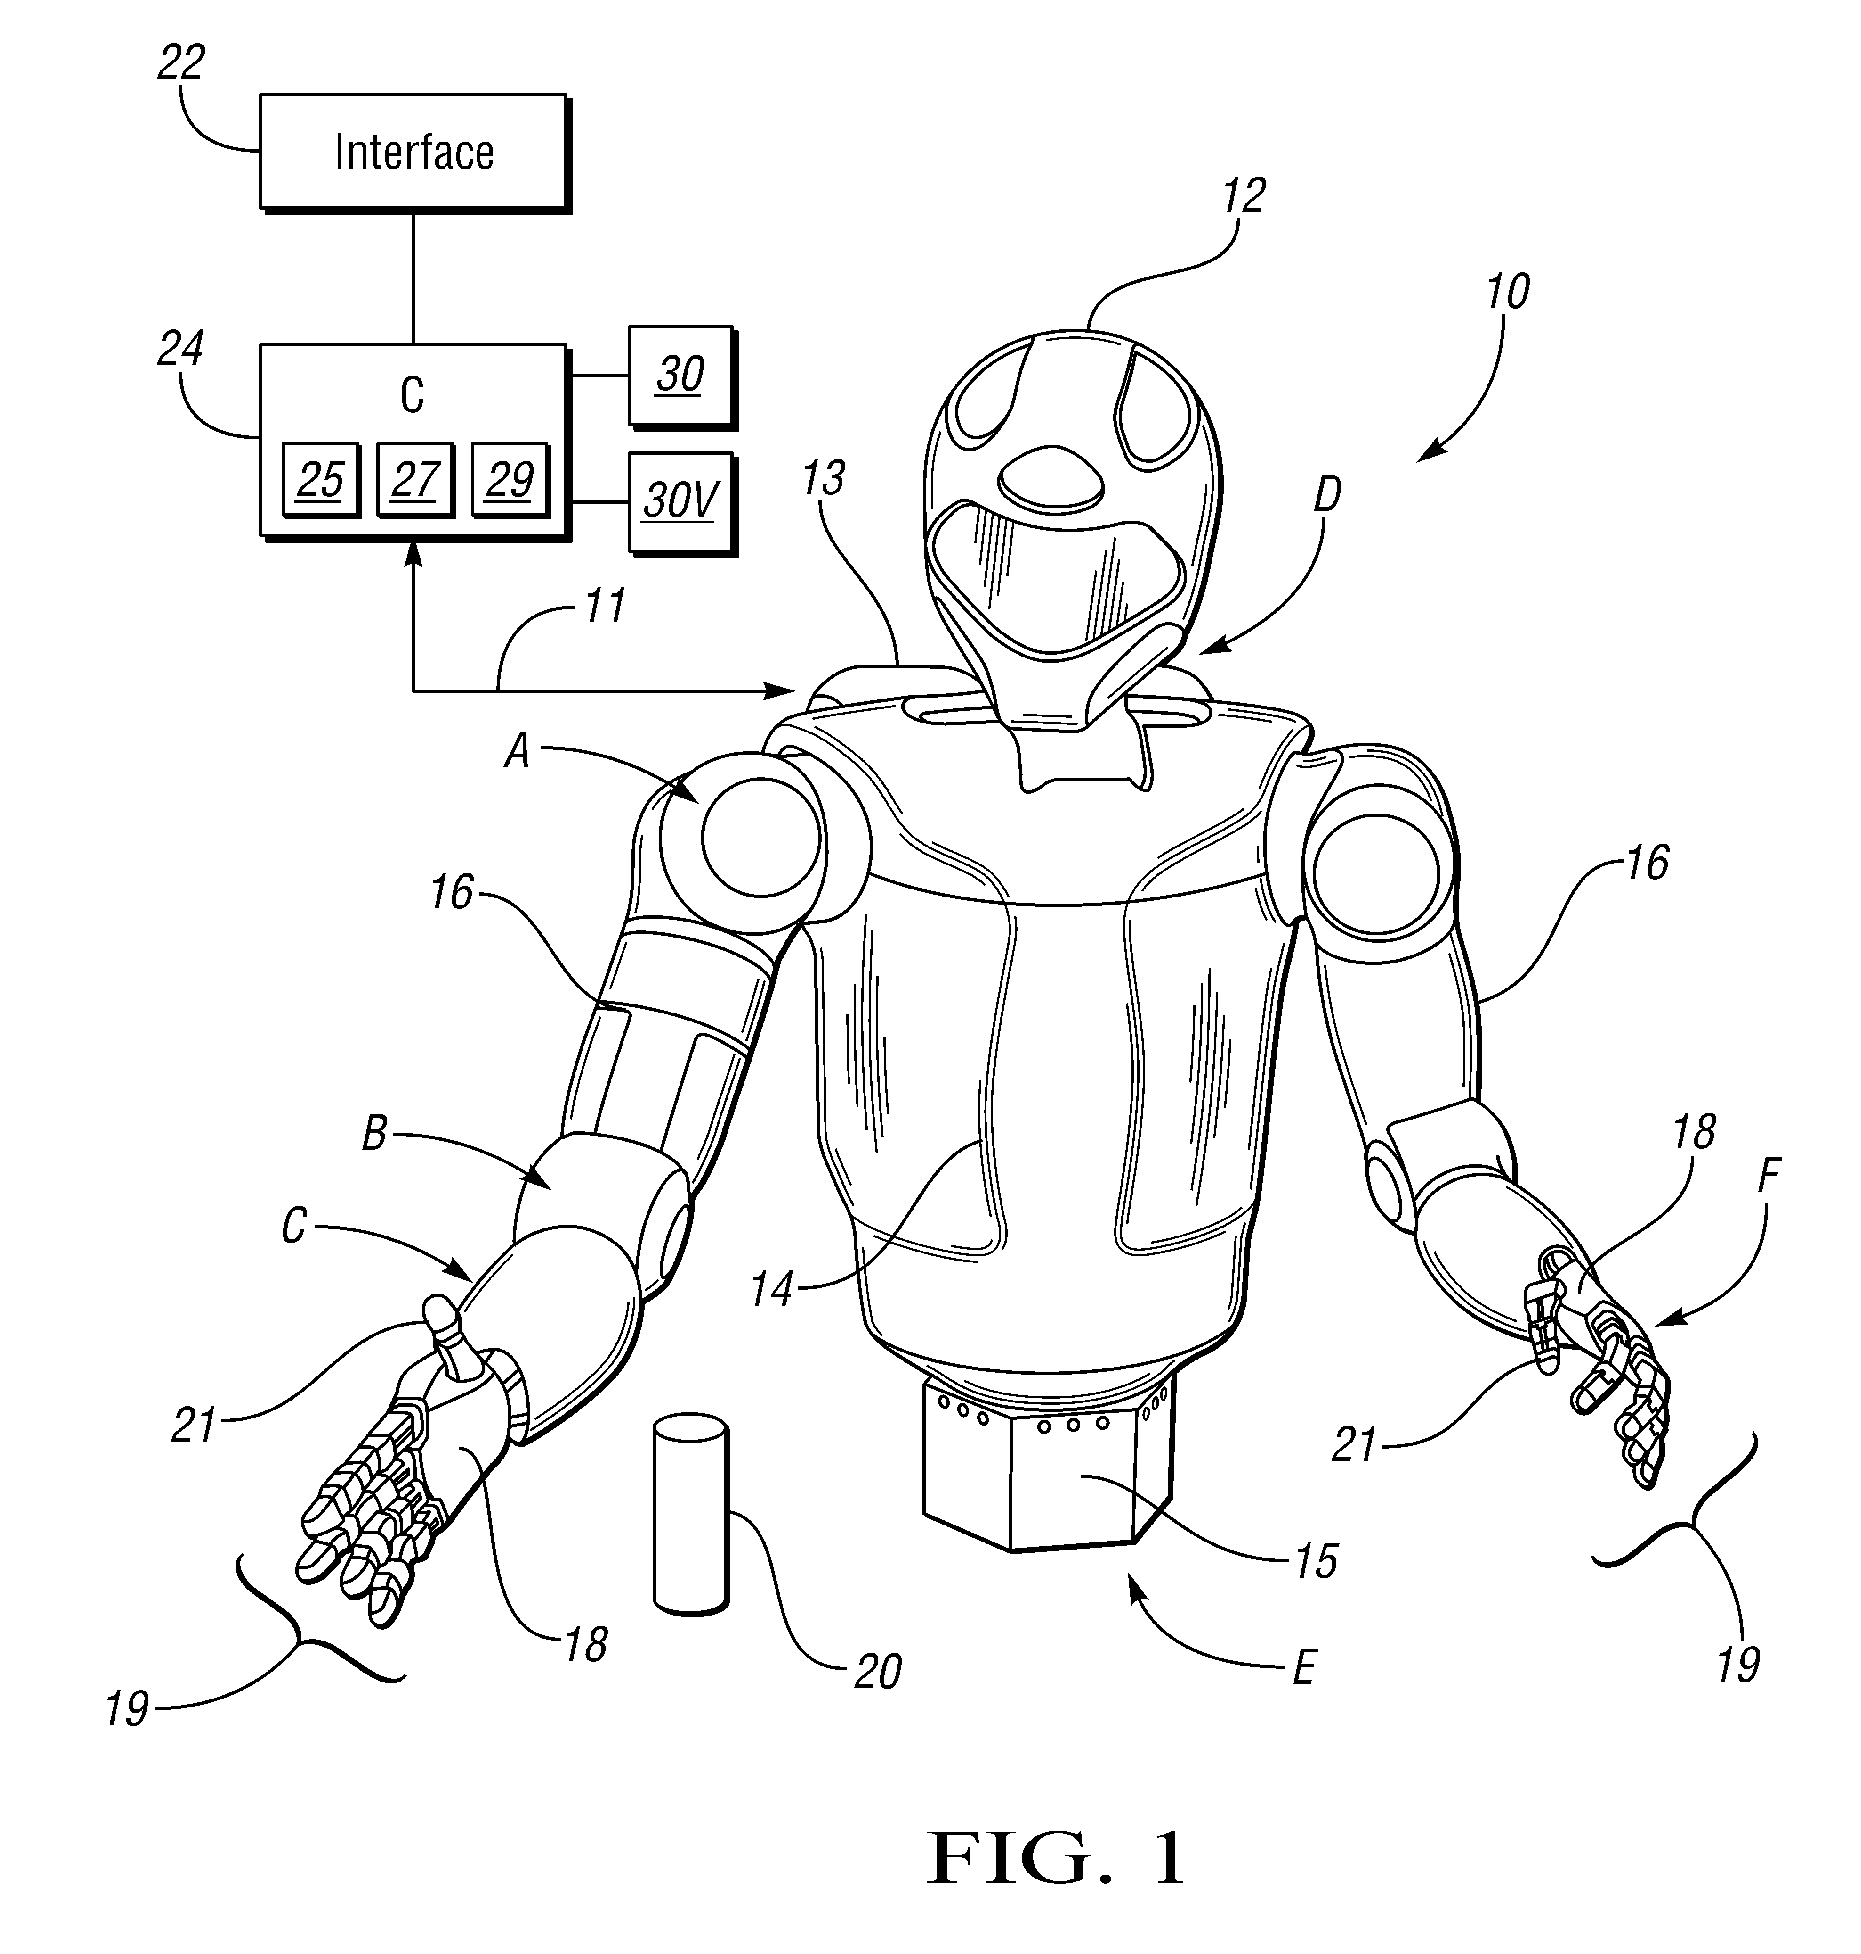 Visual perception system and method for a humanoid robot